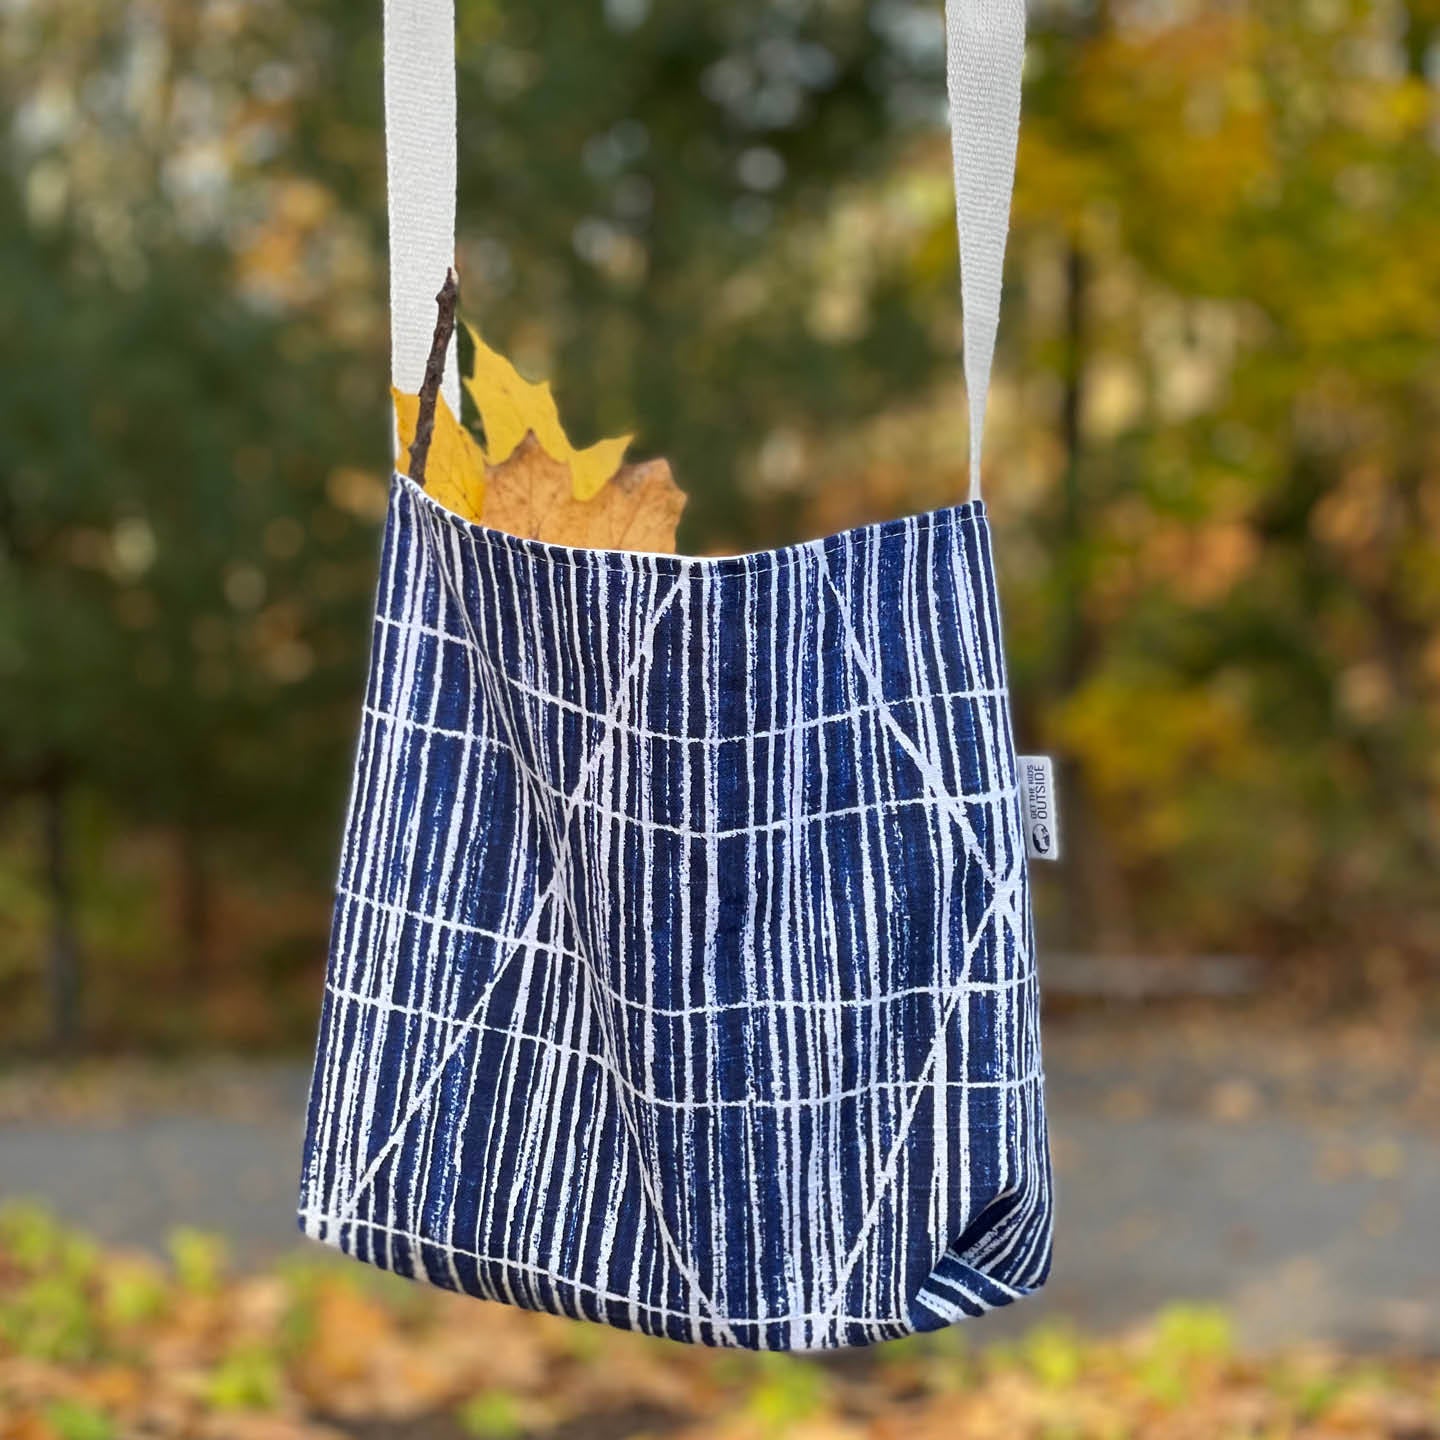 Forager Bags: Navy Grid